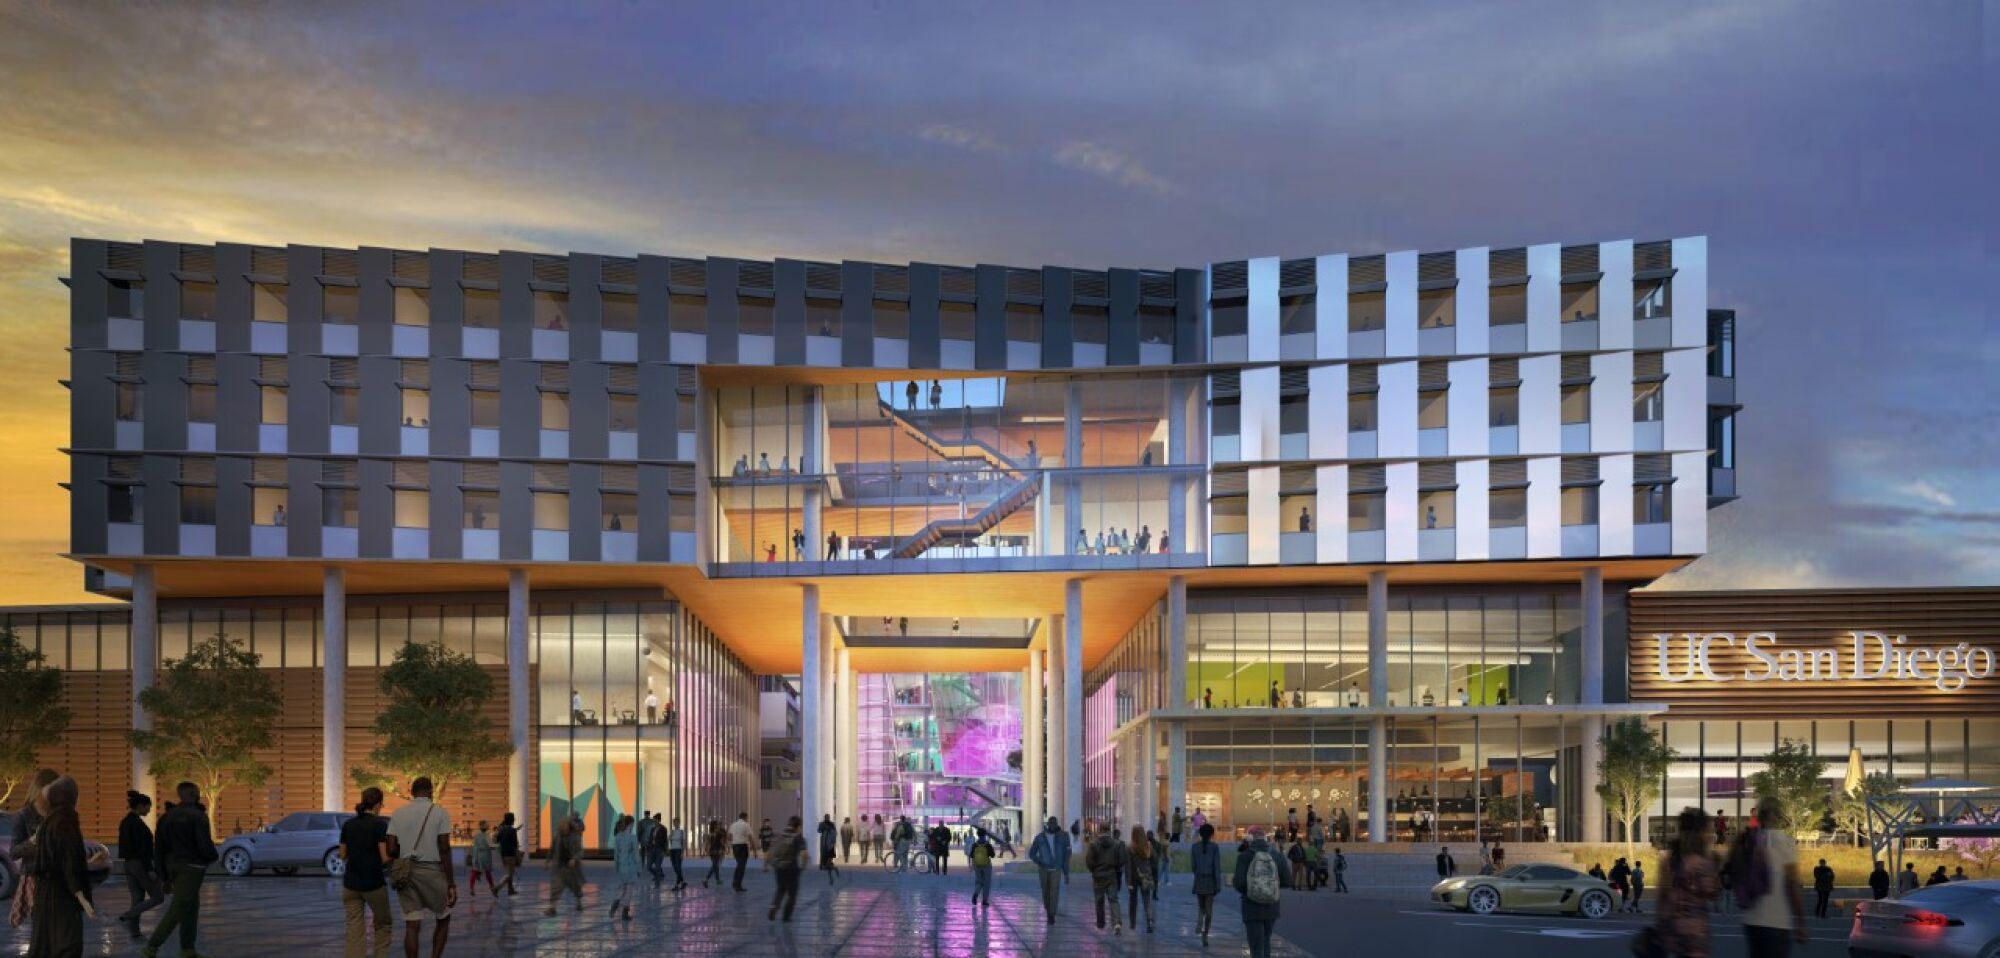 Artist's rendering of UCSD's planned Triton Center complex.